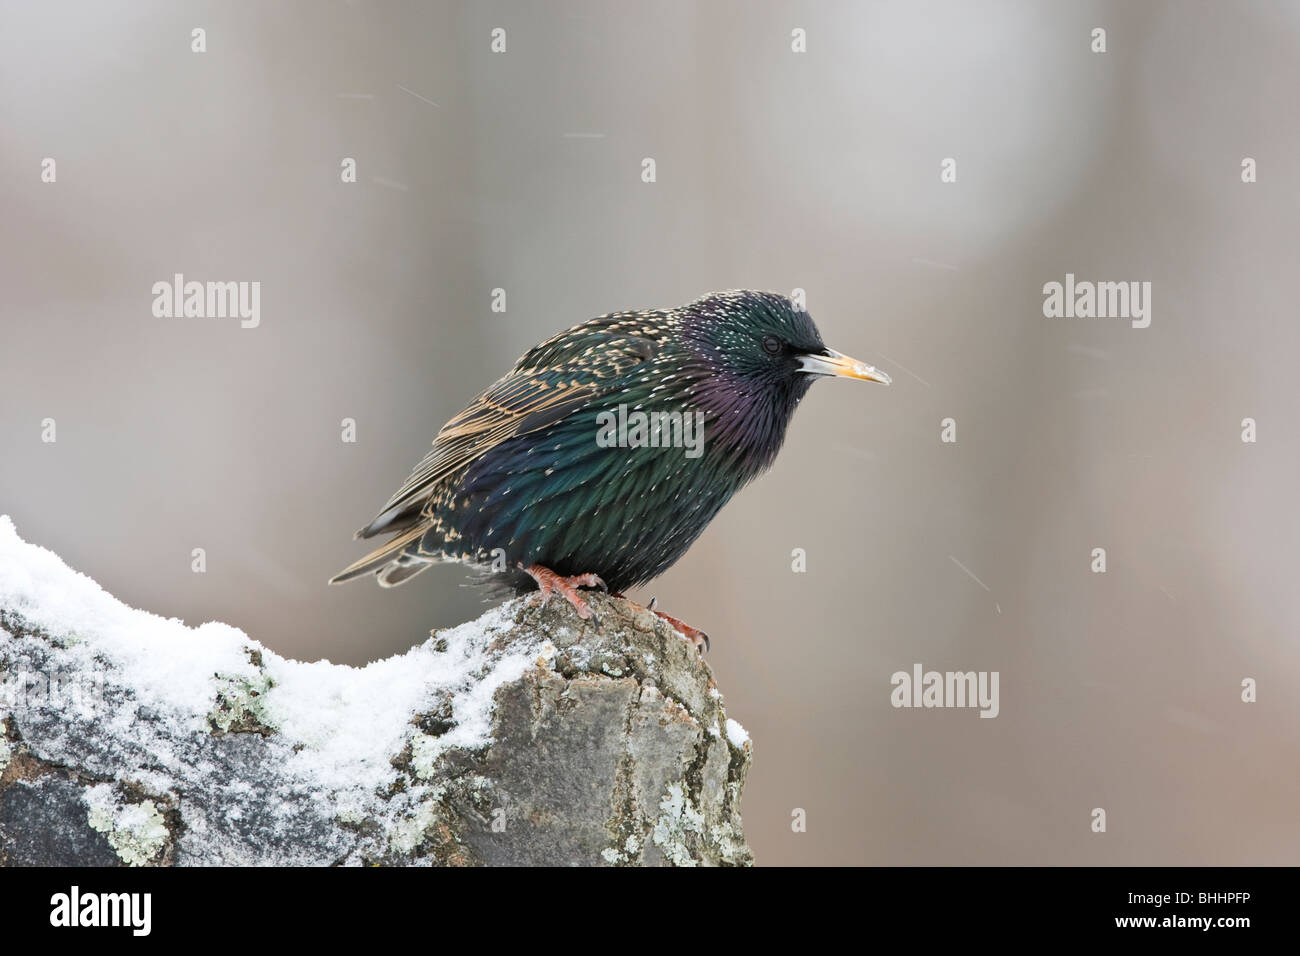 European Starling in Snow Stock Photo